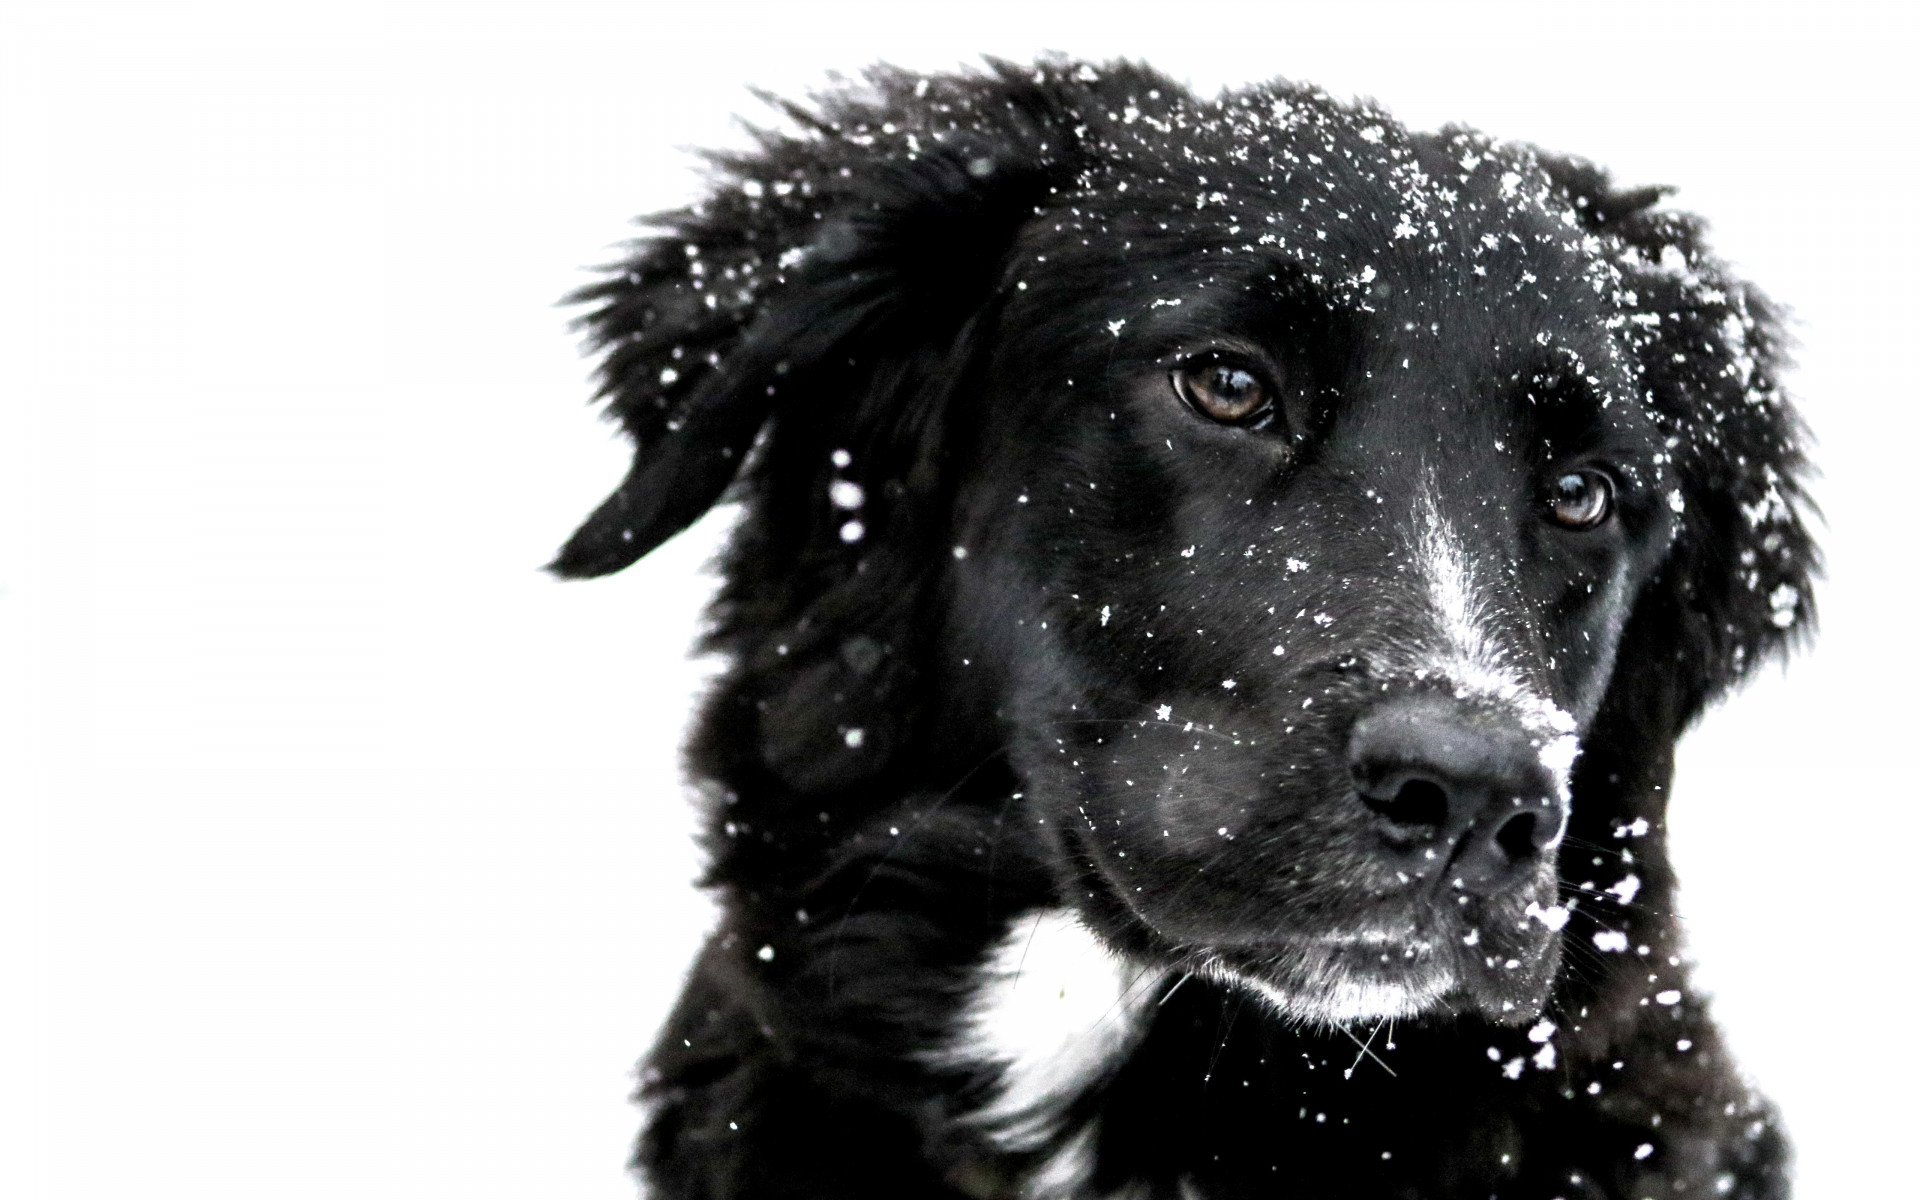 Snowing over the cute dog wallpaper 1920x1200